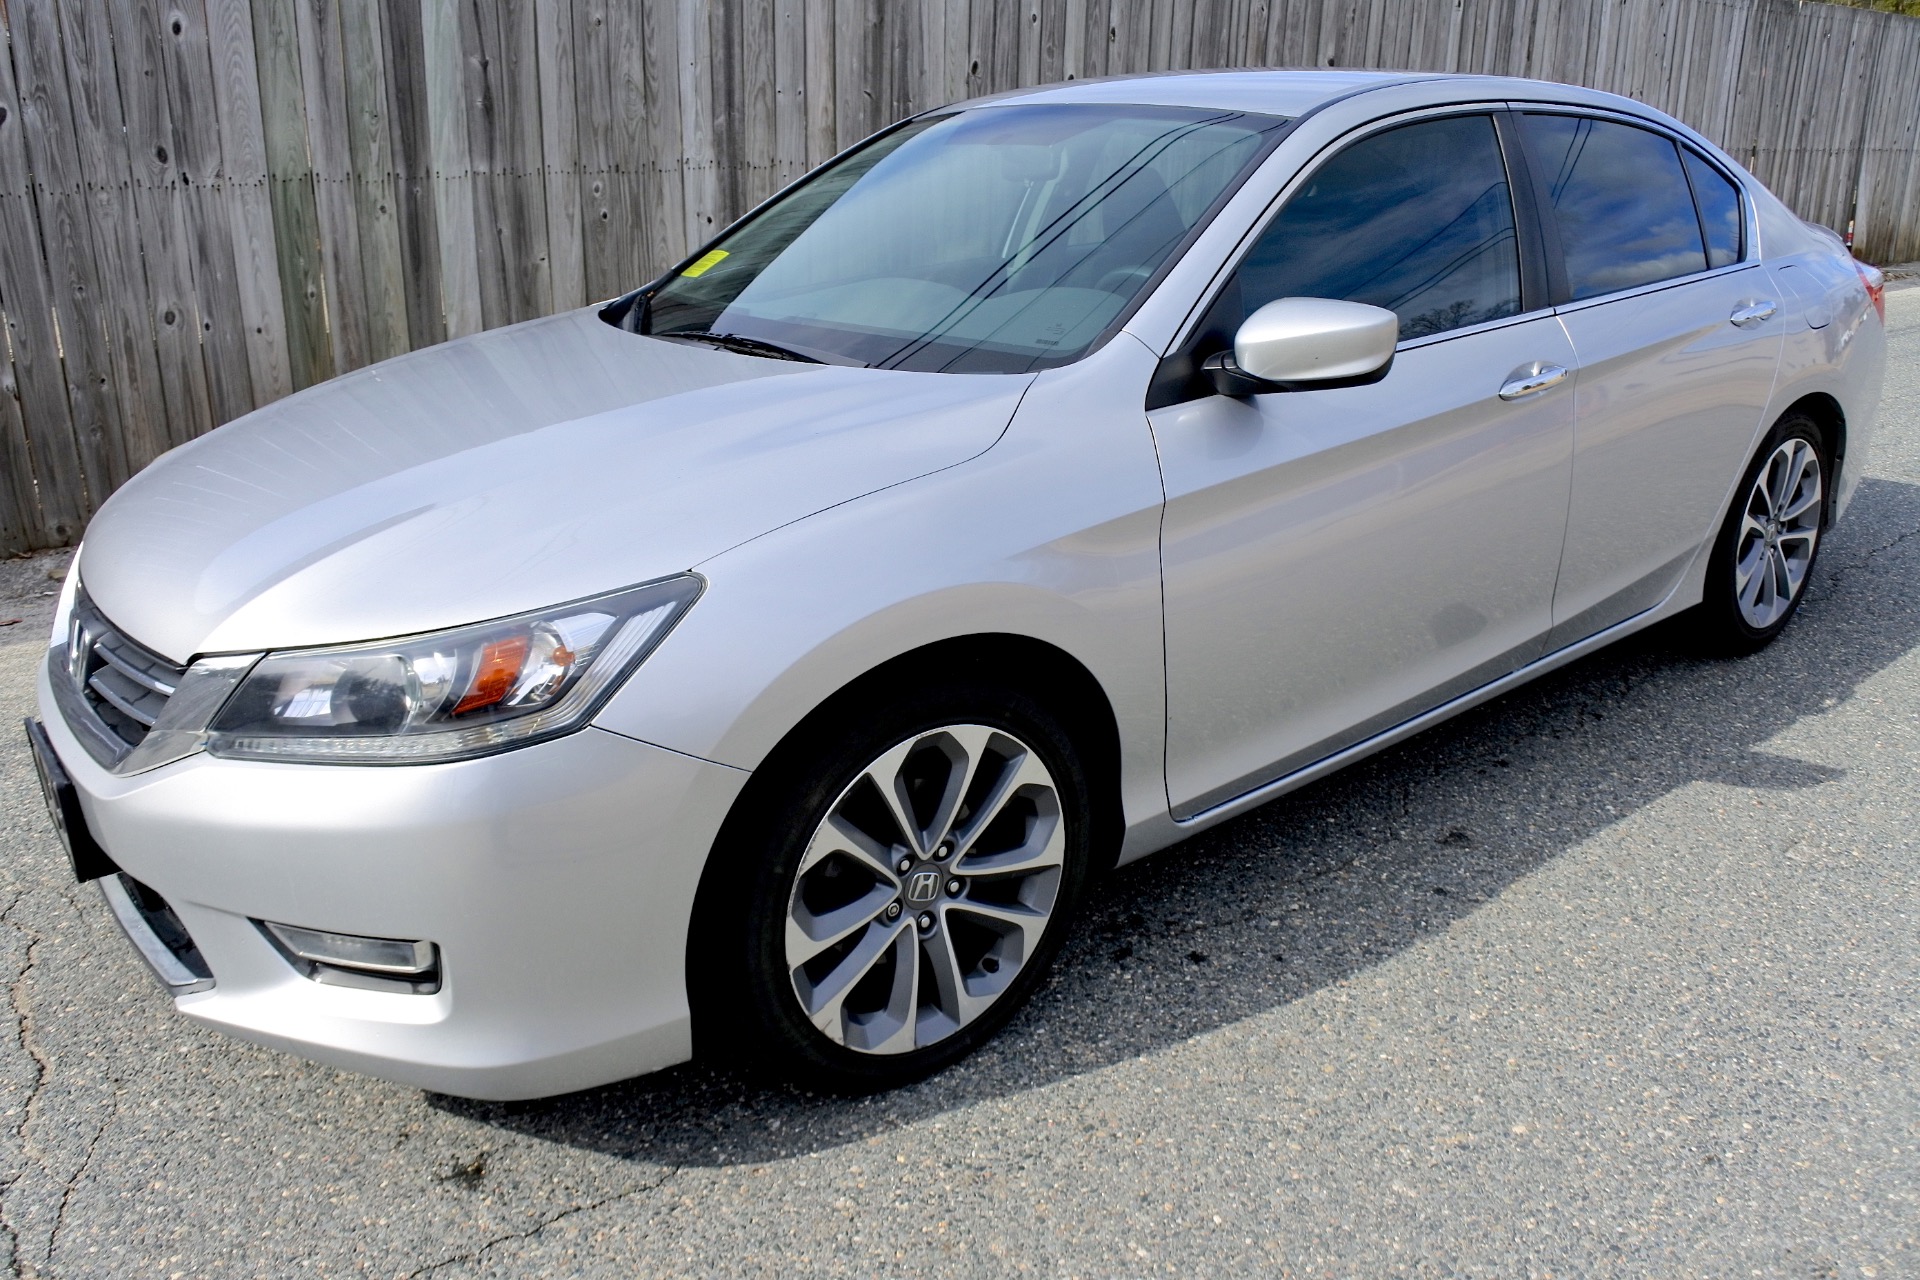 Used 2013 Honda Accord Sdn Sport I4 CVT For Sale 9 900 Metro West 